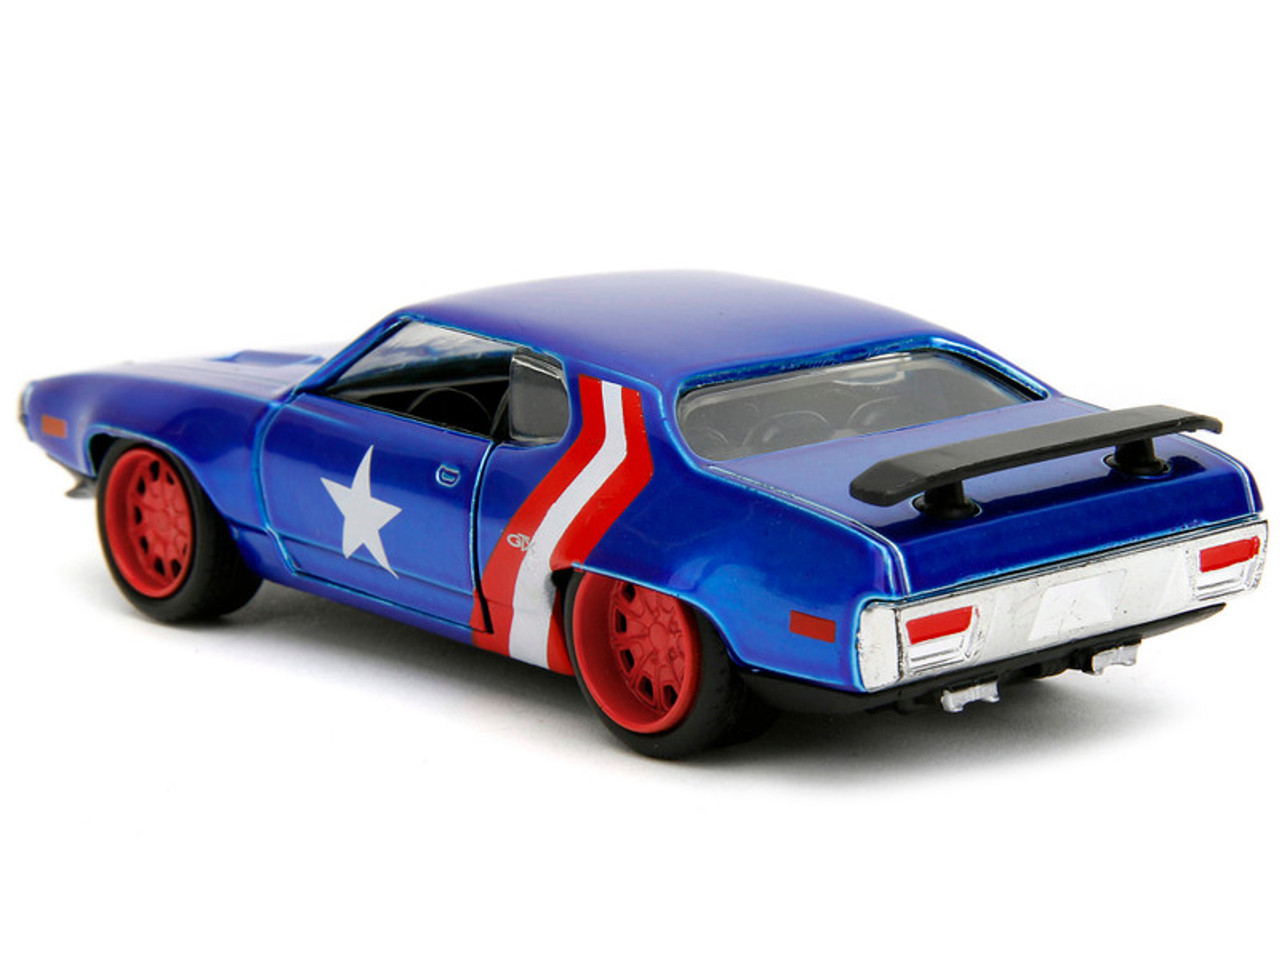 1972 Plymouth GTX Candy Blue with Red and White Stripes and Captain America Diecast Figure "The Avengers" "Hollywood Rides" Series 1/32 Diecast Model Car by Jada